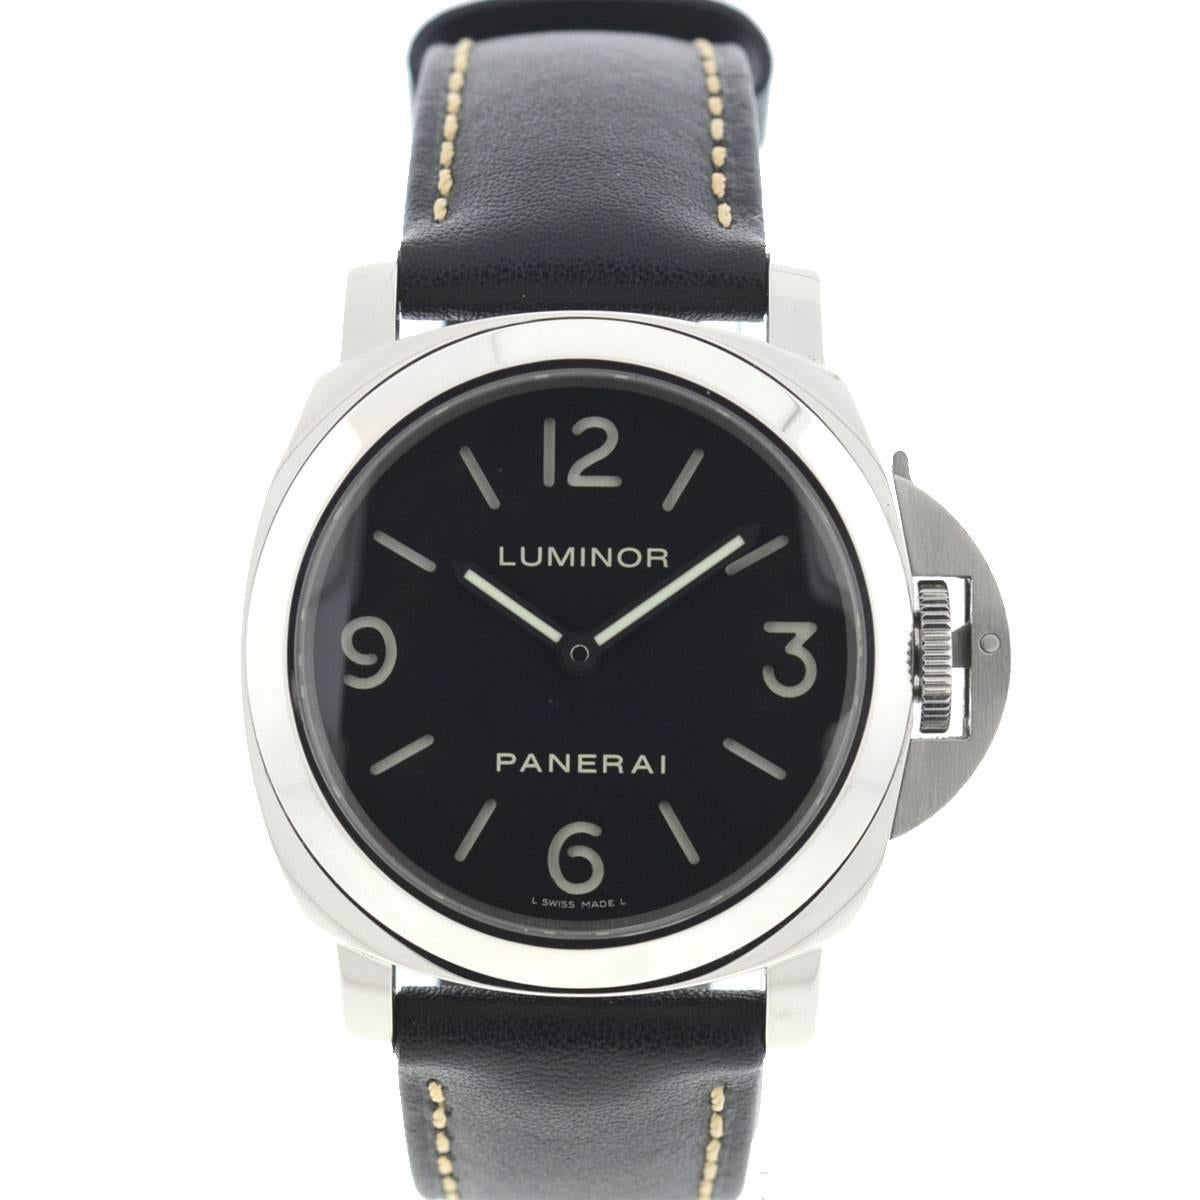 Company - Panerai
Model - LUMINOR 002
Case Metal - Stainless Steel 
Case Size - 44mm - Skeleton Back 
Dial - Black
Bezel - Stainless Steel
Bracelet - Leather (extra Rubber band included)
Crystal - Scratch Resistant Sapphire
Movement -